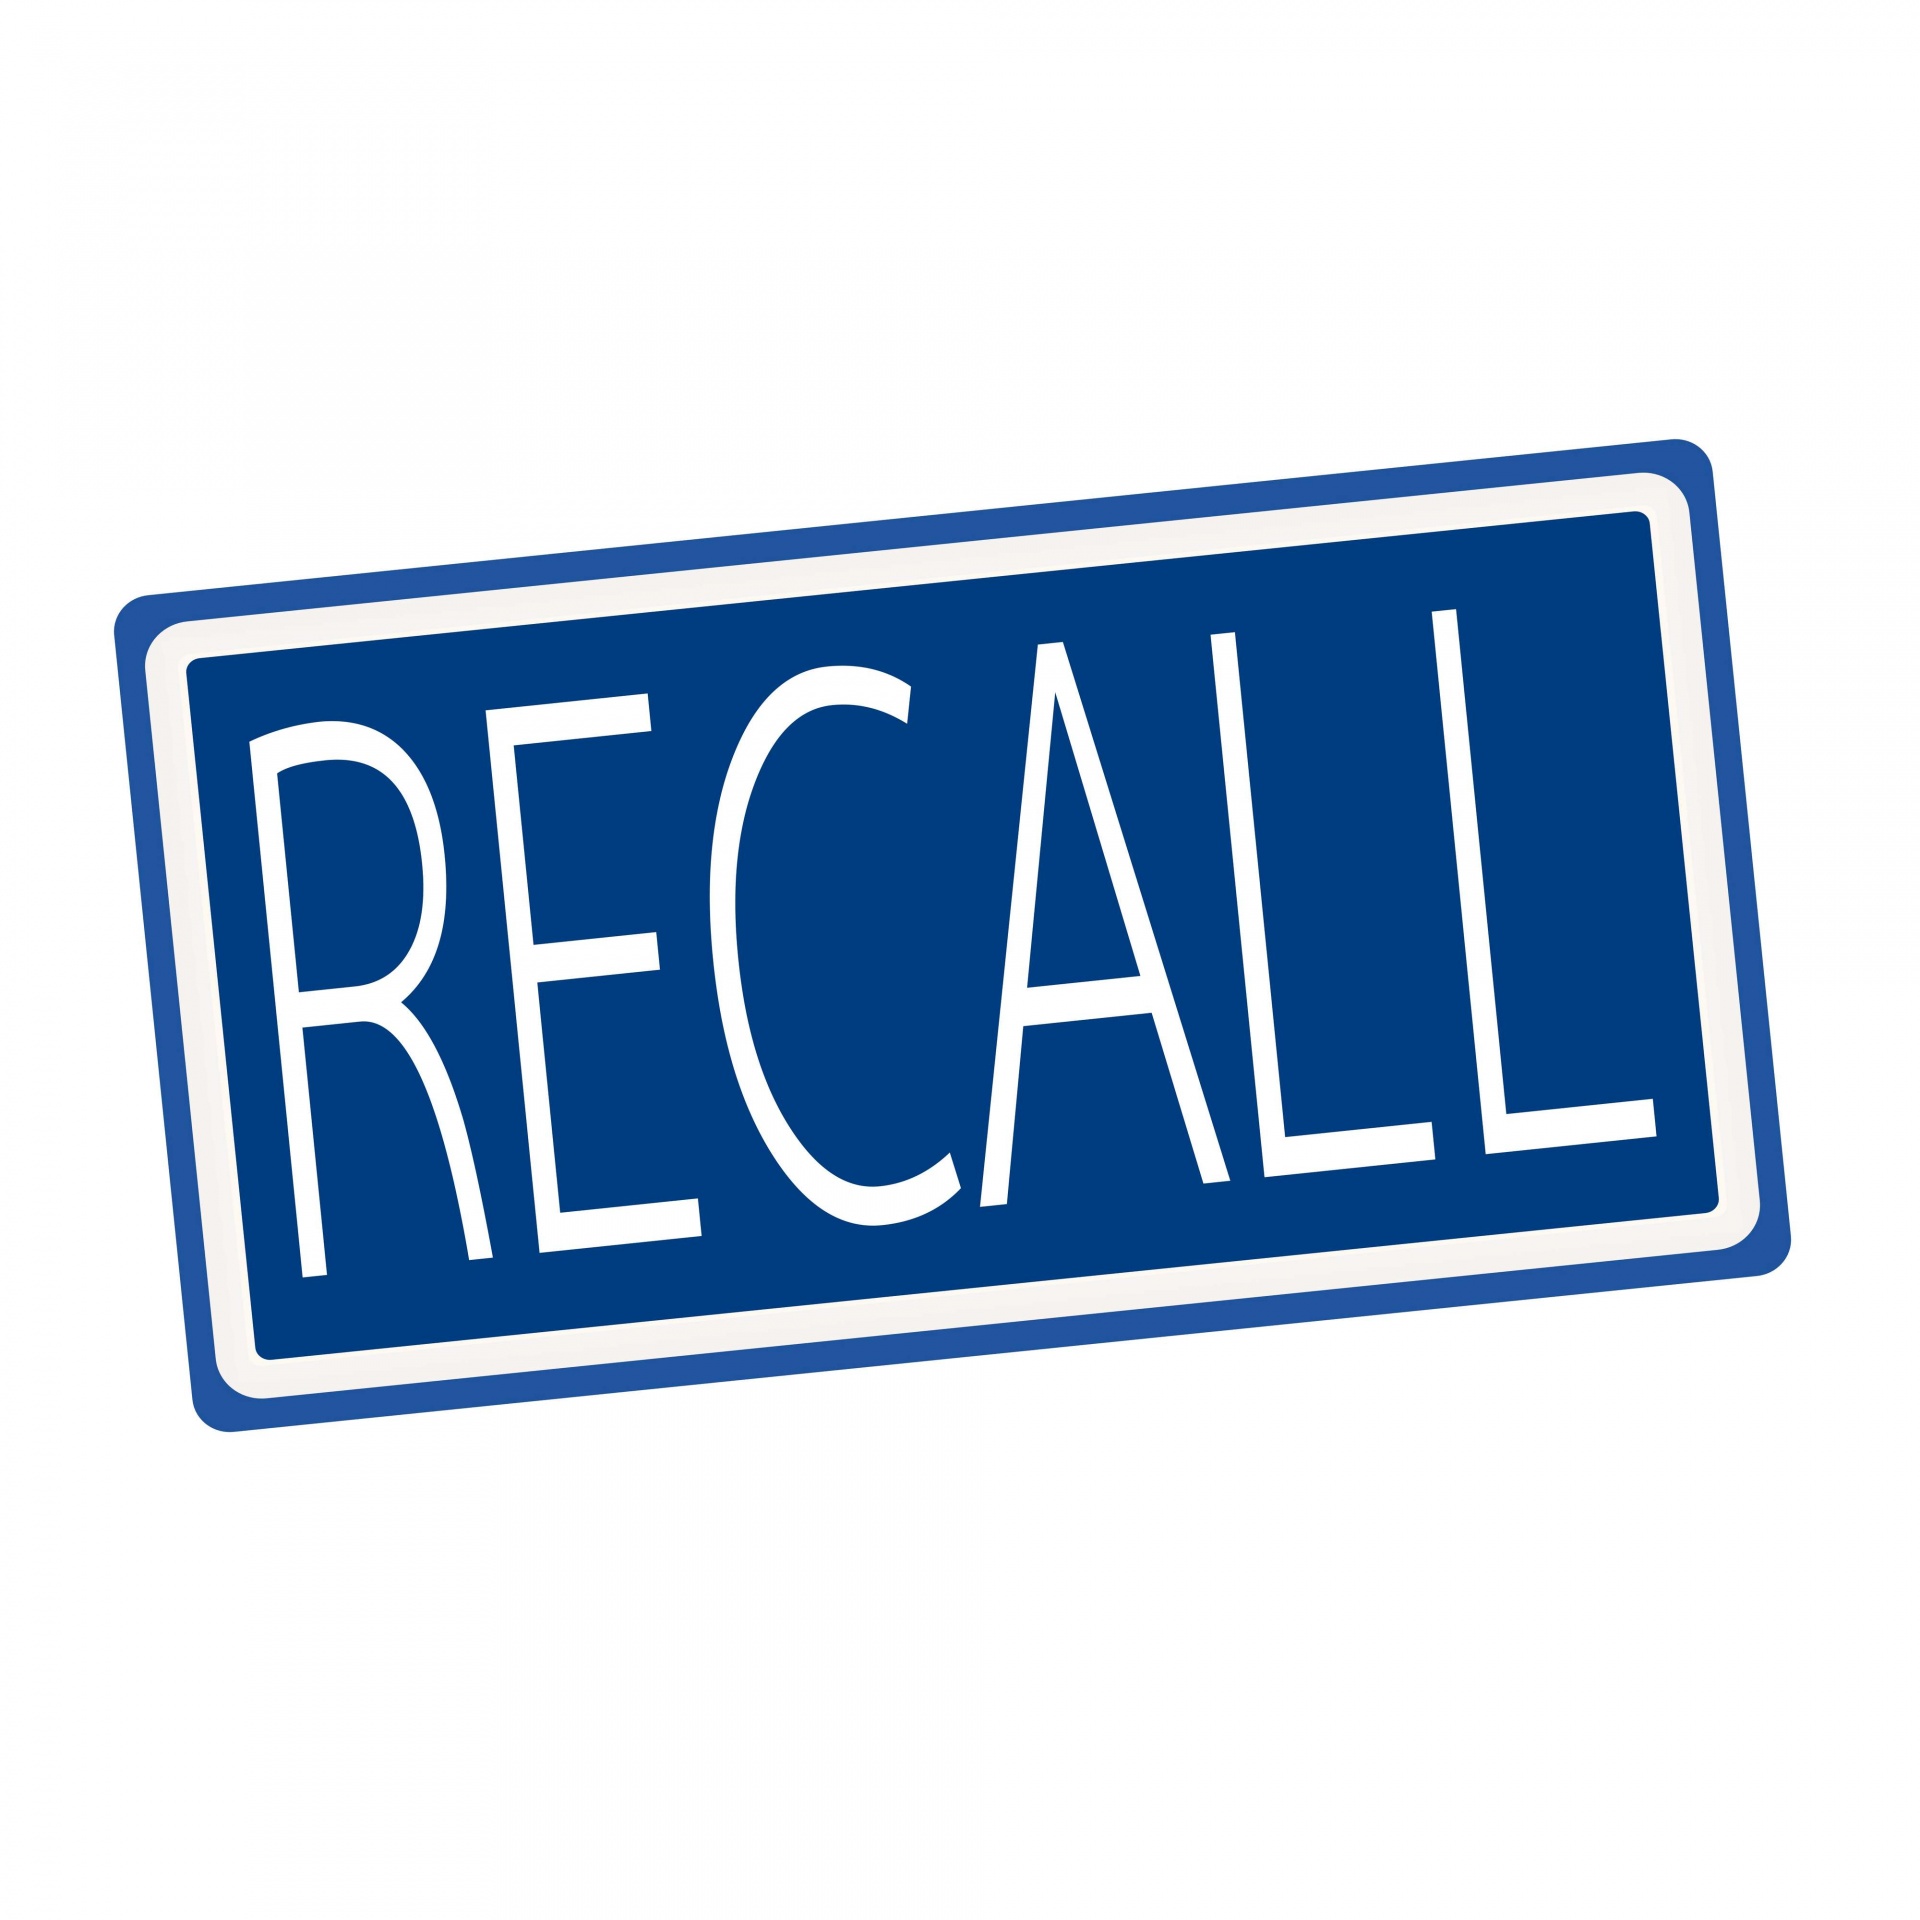 Recall White Stamp Text On Blue